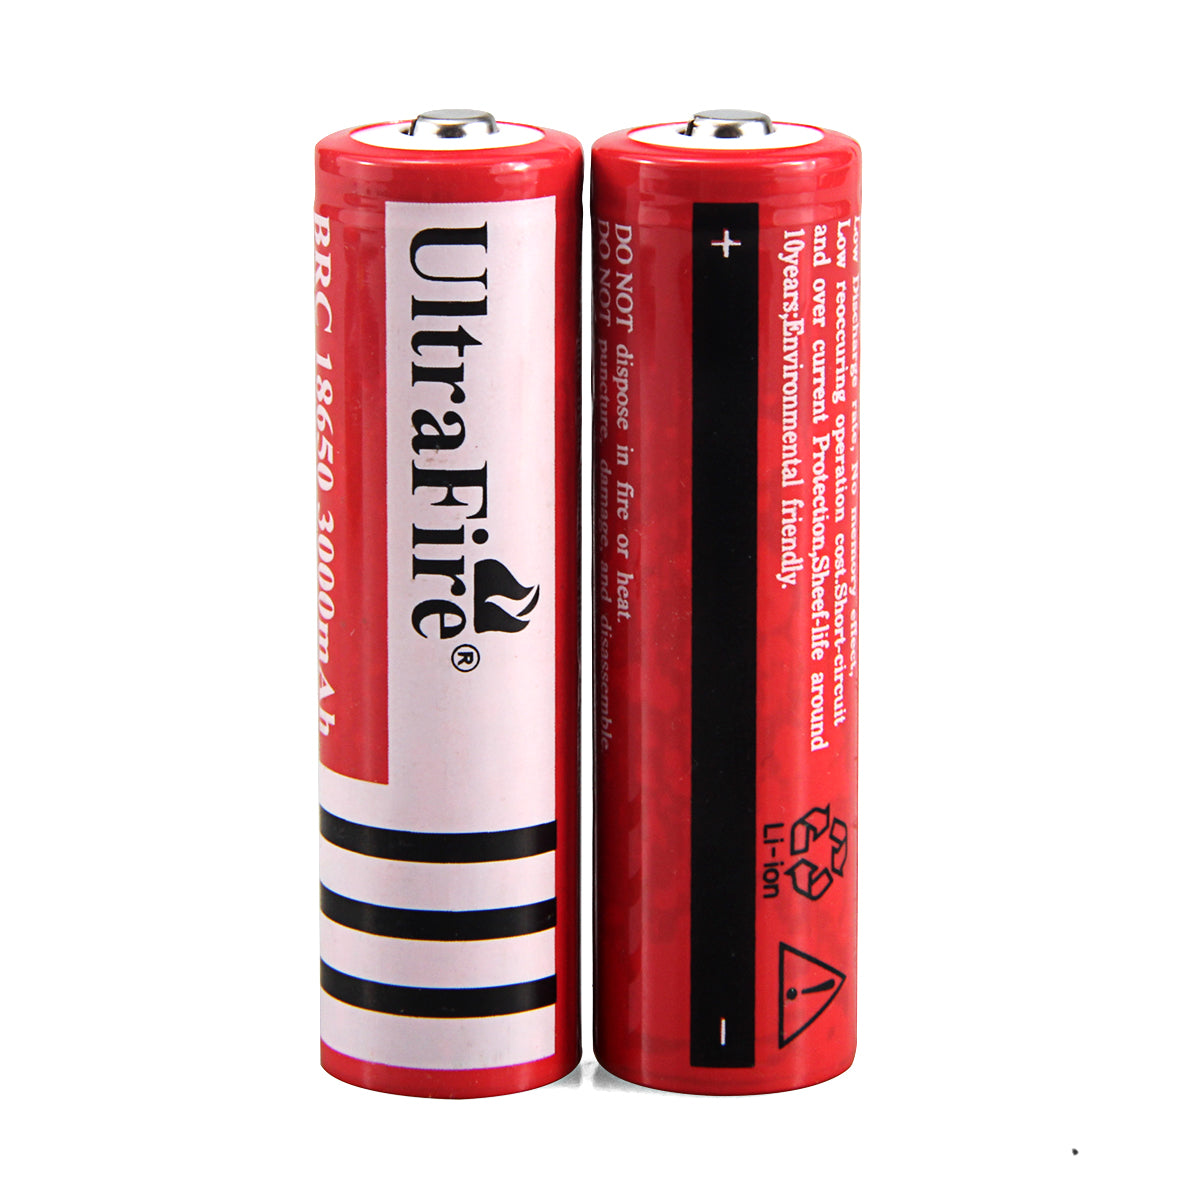 Buy Authentic UltraFire Batteries - UltraFire Official Store